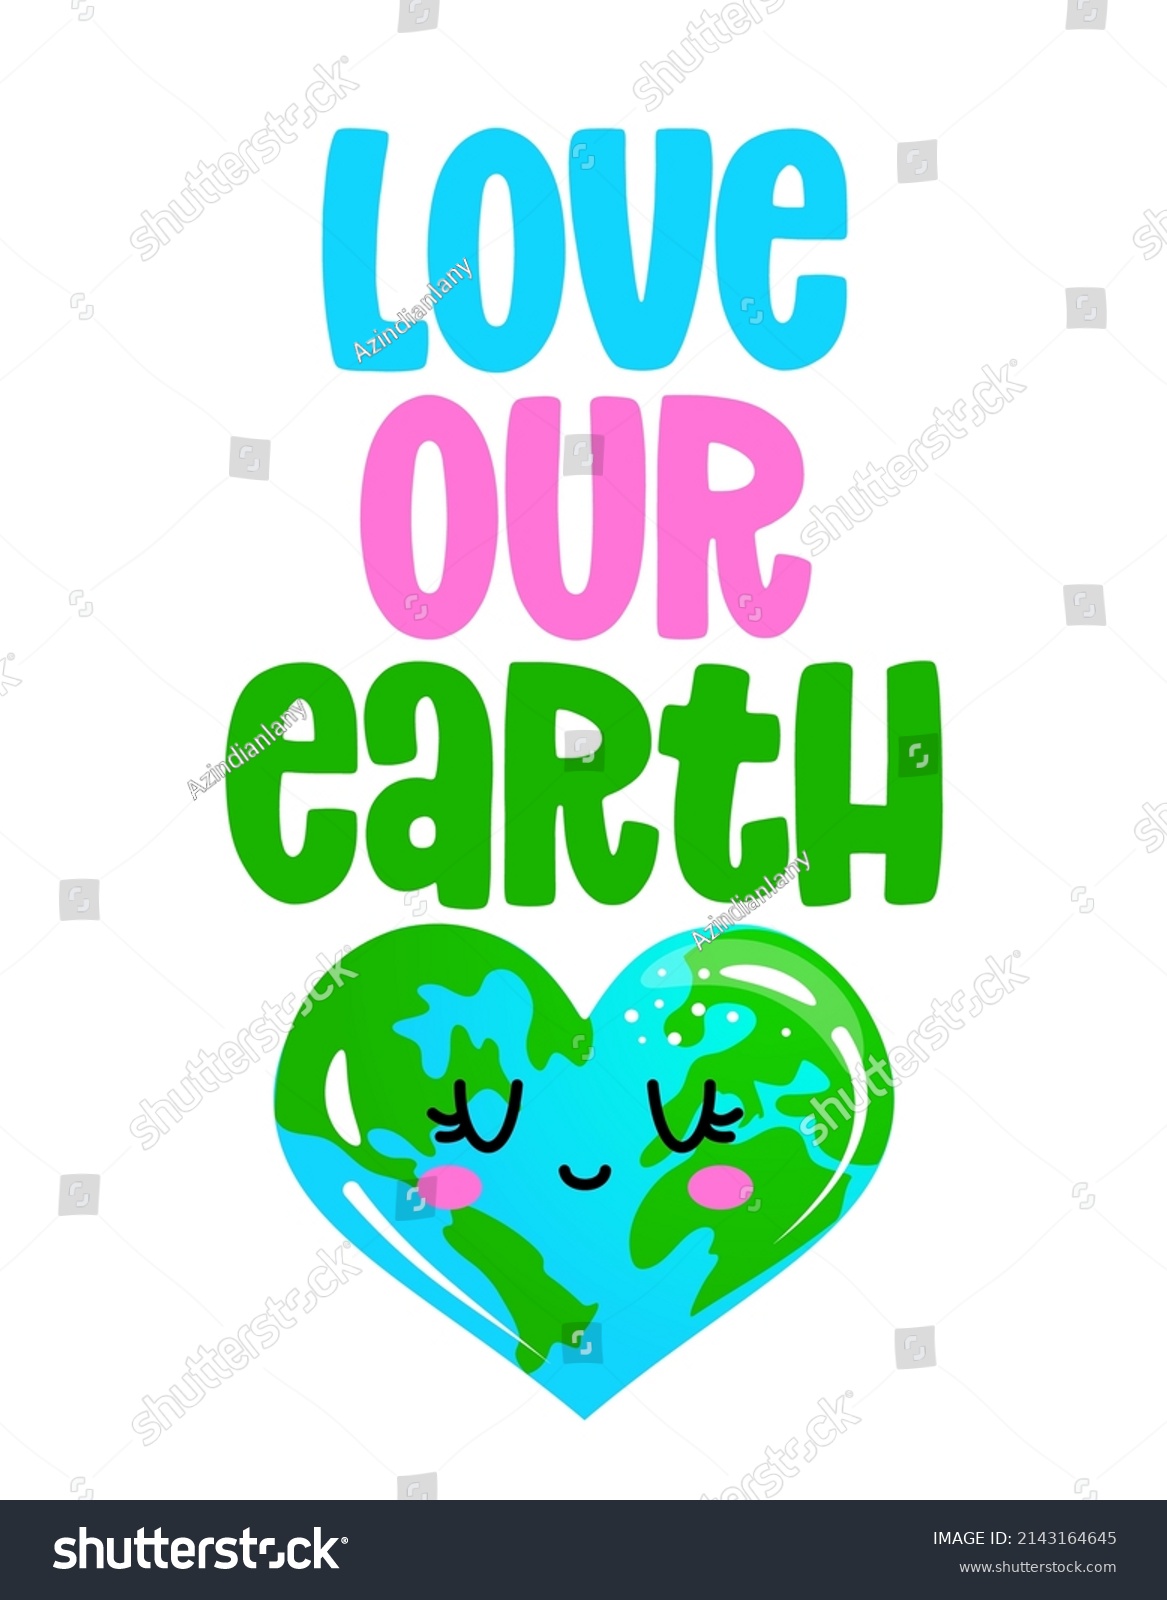 SVG of Love our Earth - Earth Day kawaii drawing with heart shape Earth. Poster or t-shirt textile graphic design. Beautiful illustration. Earth Day environmental Protection. Every year on April 22. svg